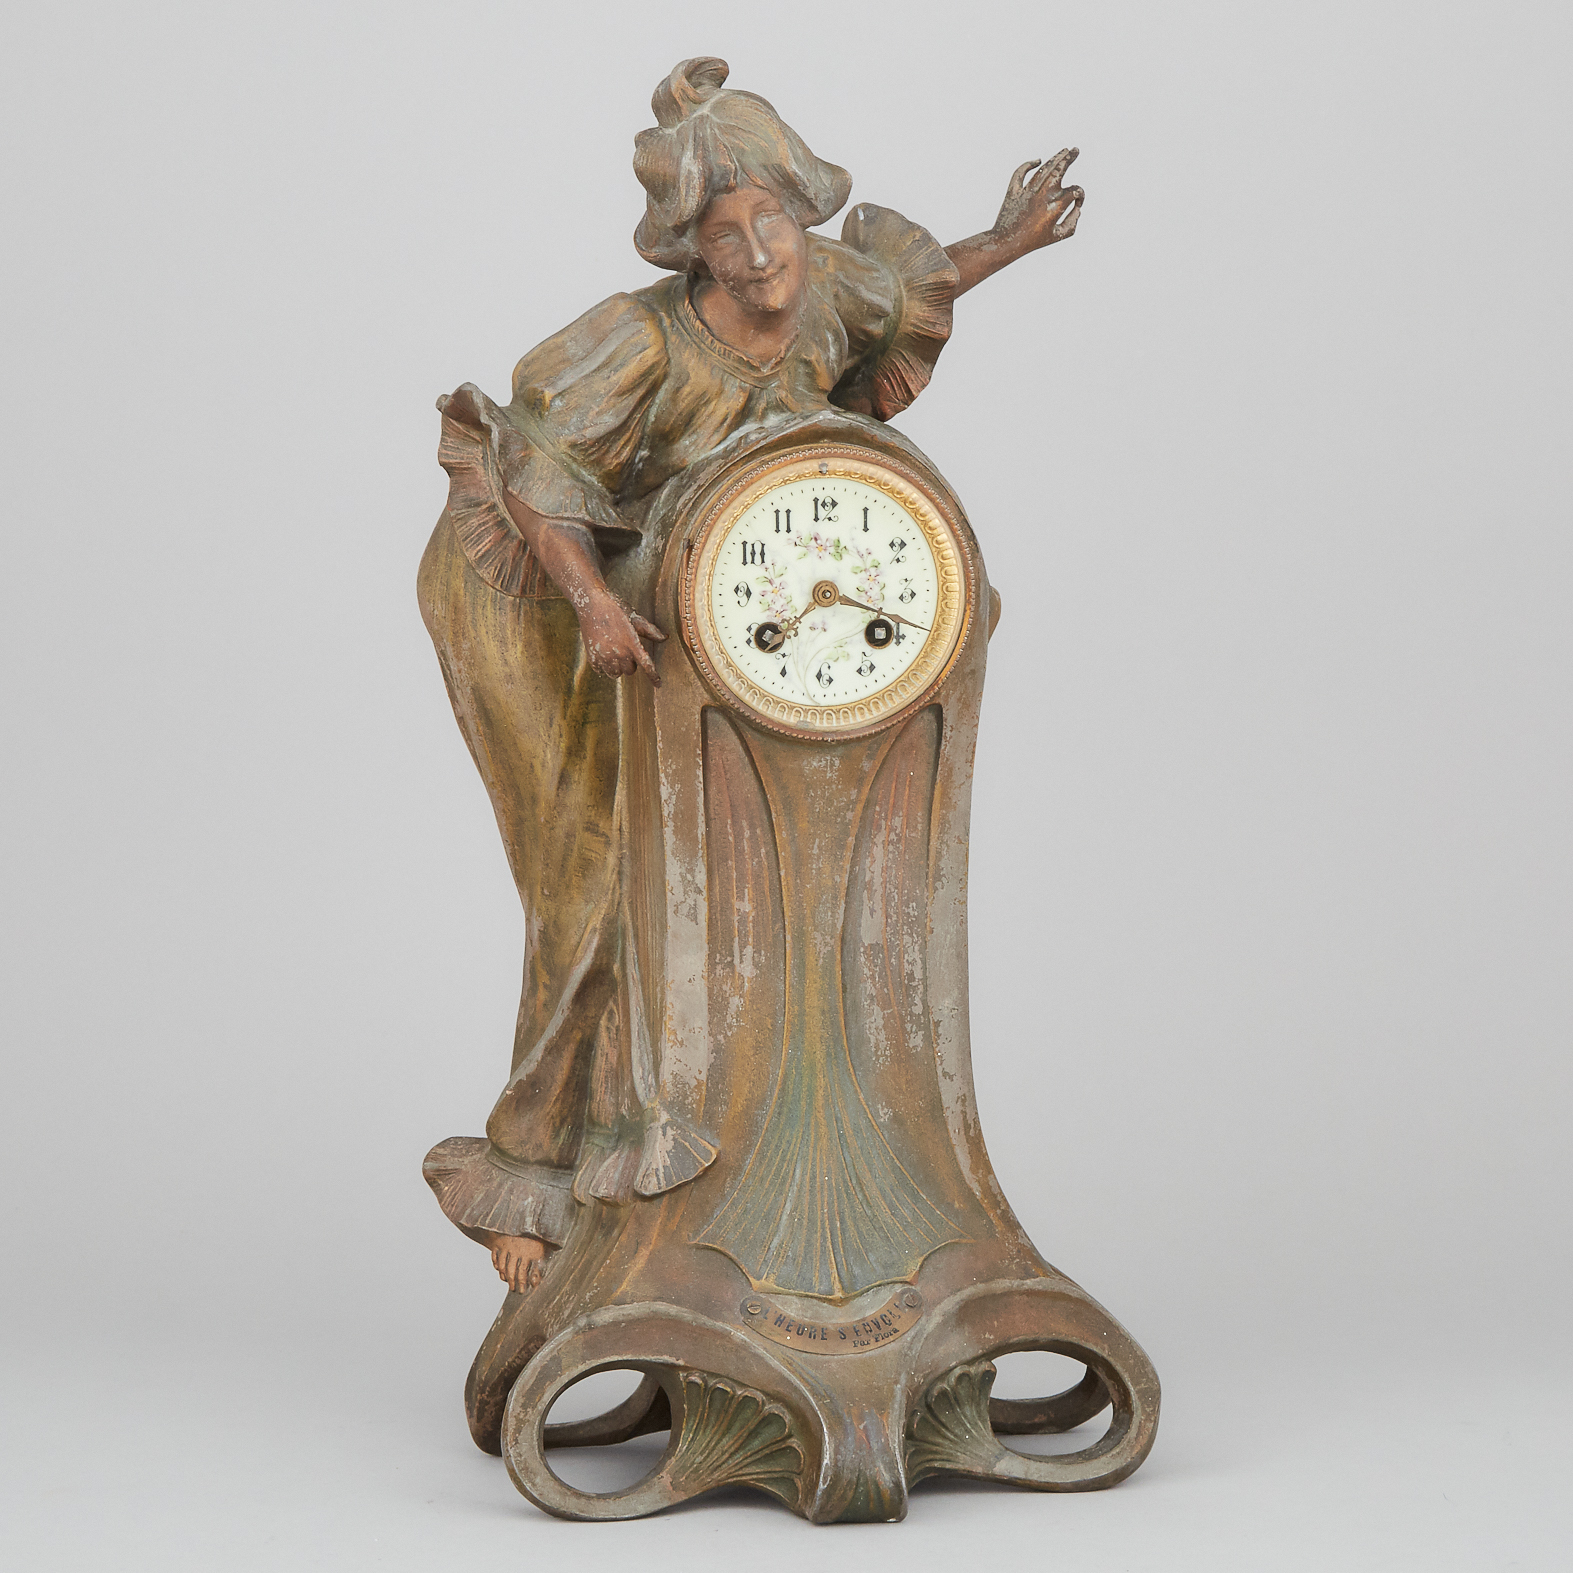 French Art Nouveau Patinated White Metal Figural Mantle Clock, c.1890